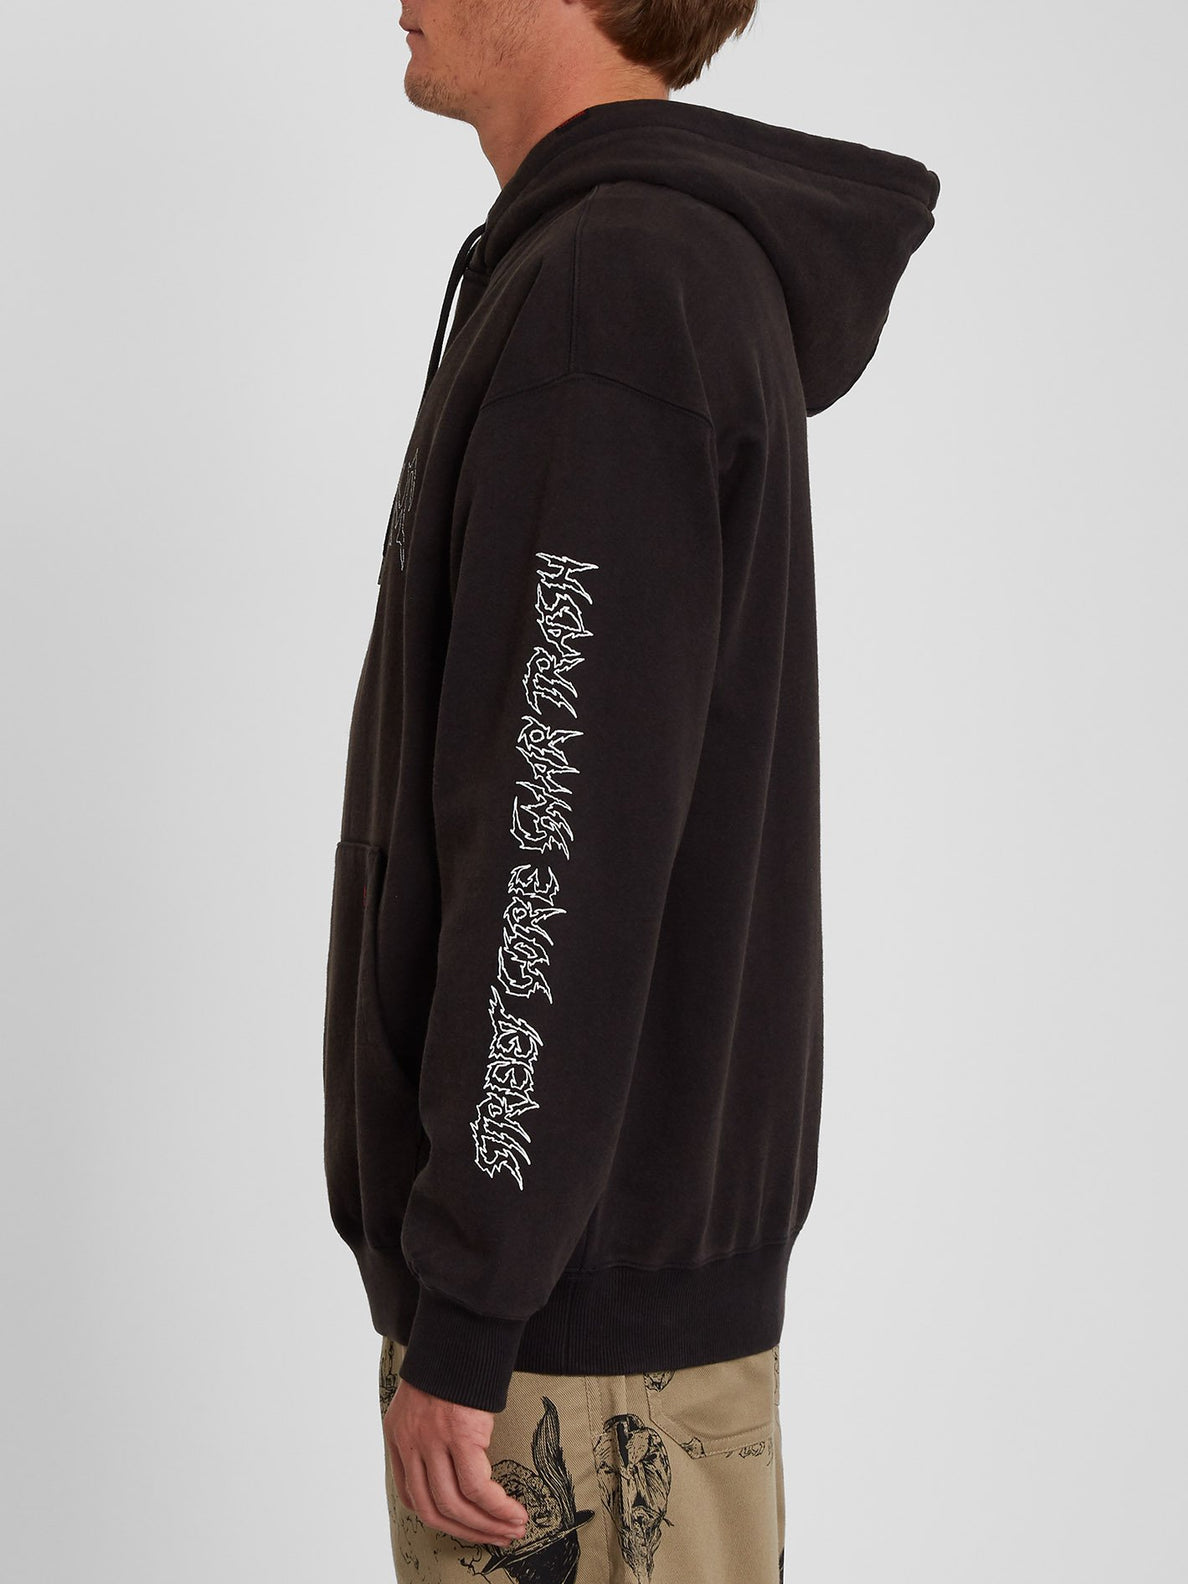 Something Out There Hoodie - BLACK (A4142004_BLK) [3]